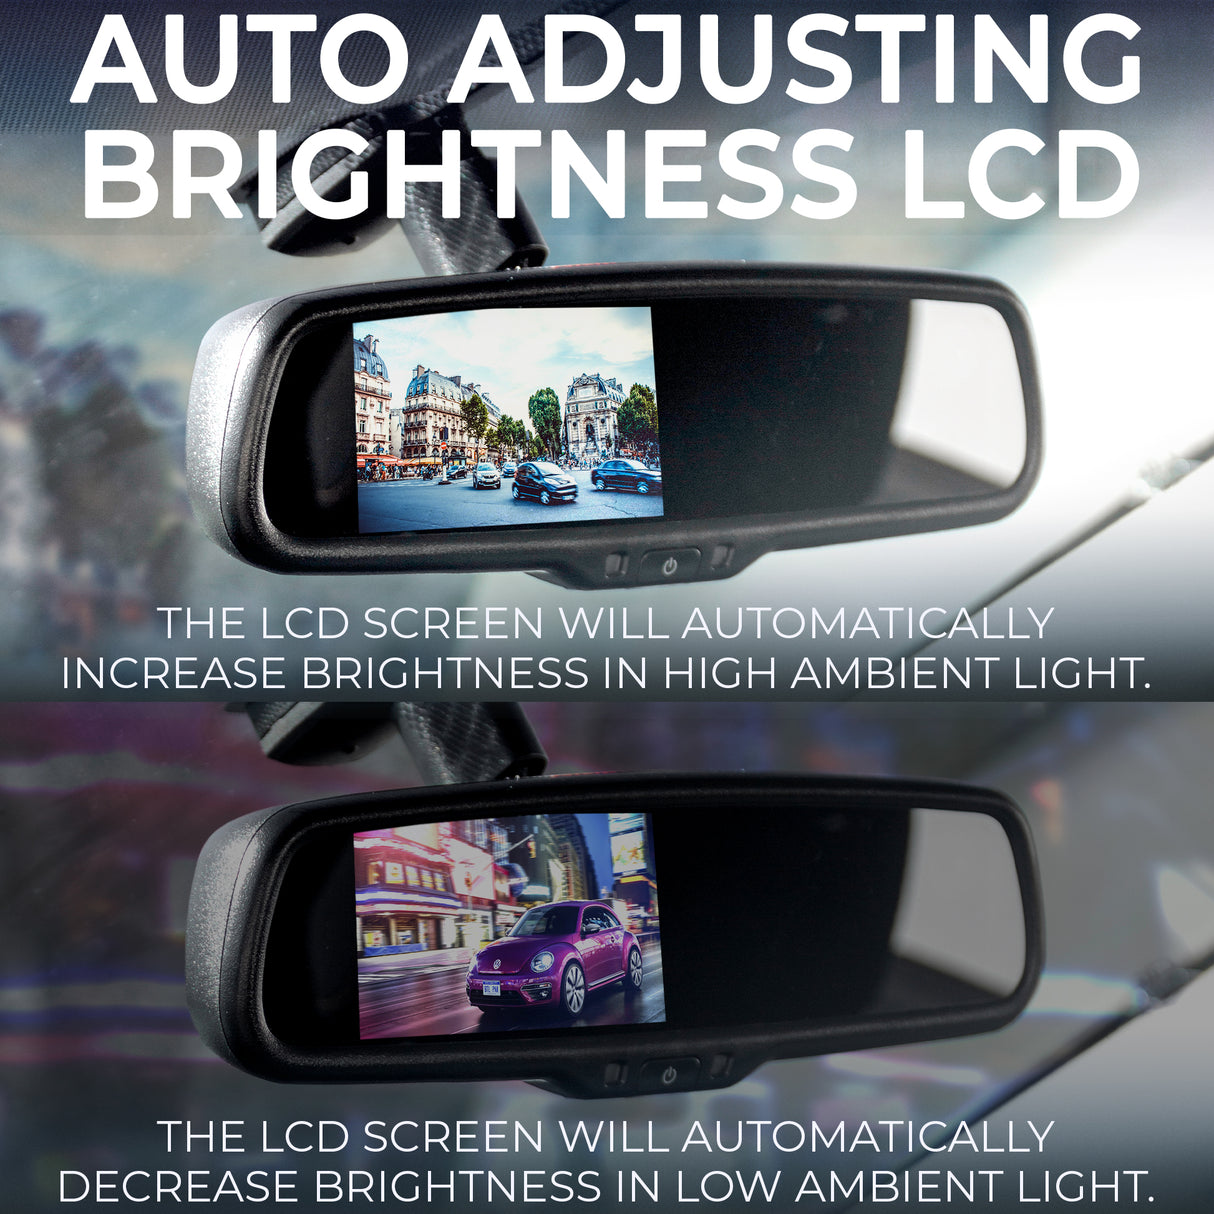 Master Tailgaters OEM Rear View Mirror with 4.3 Auto Adjusting Brightness LCD + Auto Dimming Mirror - Universal Fit